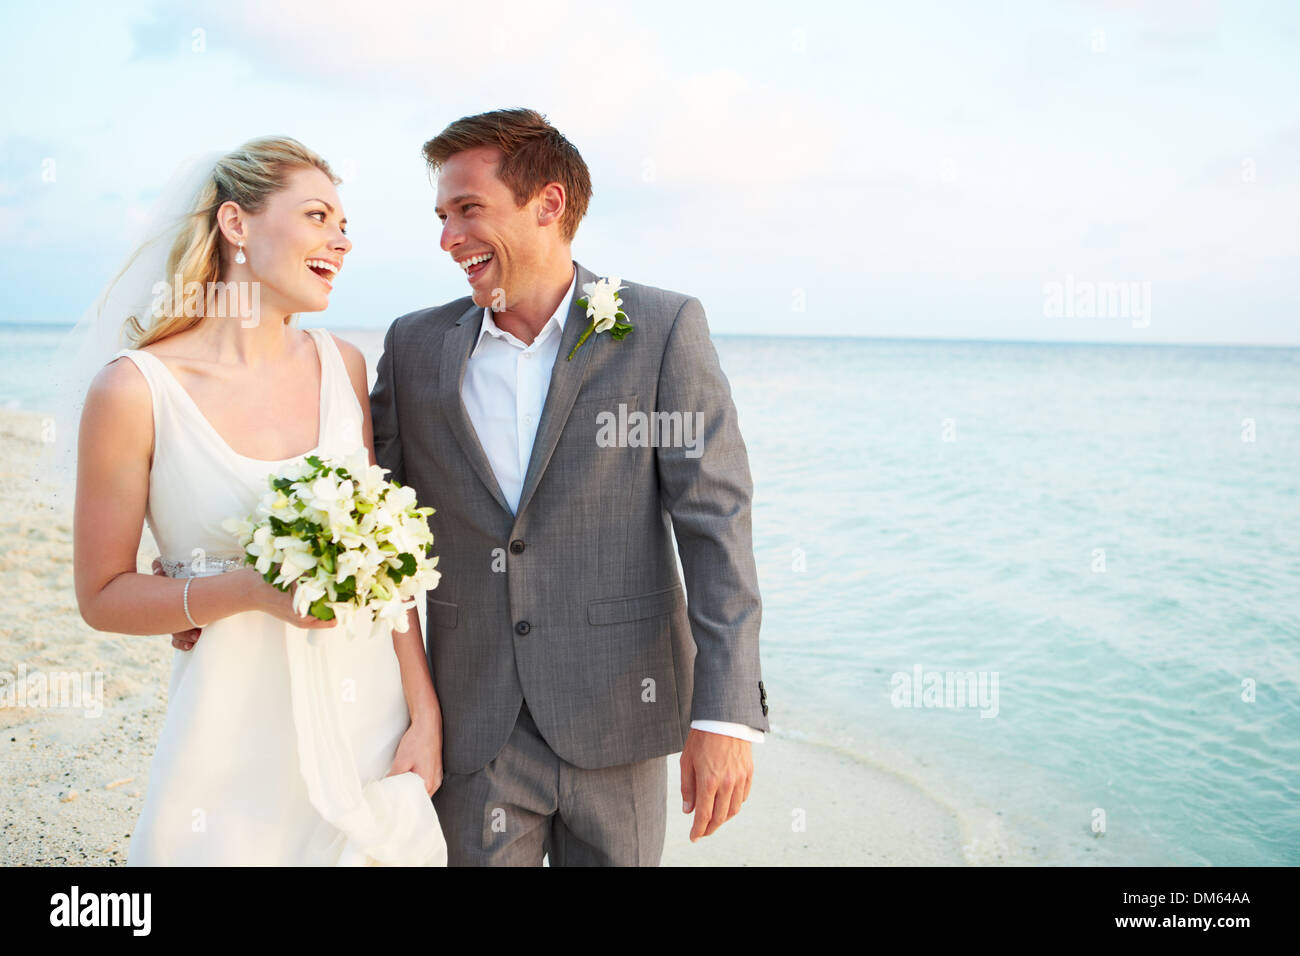 Bride And Groom Getting Married In Beach Ceremony Stock Photo